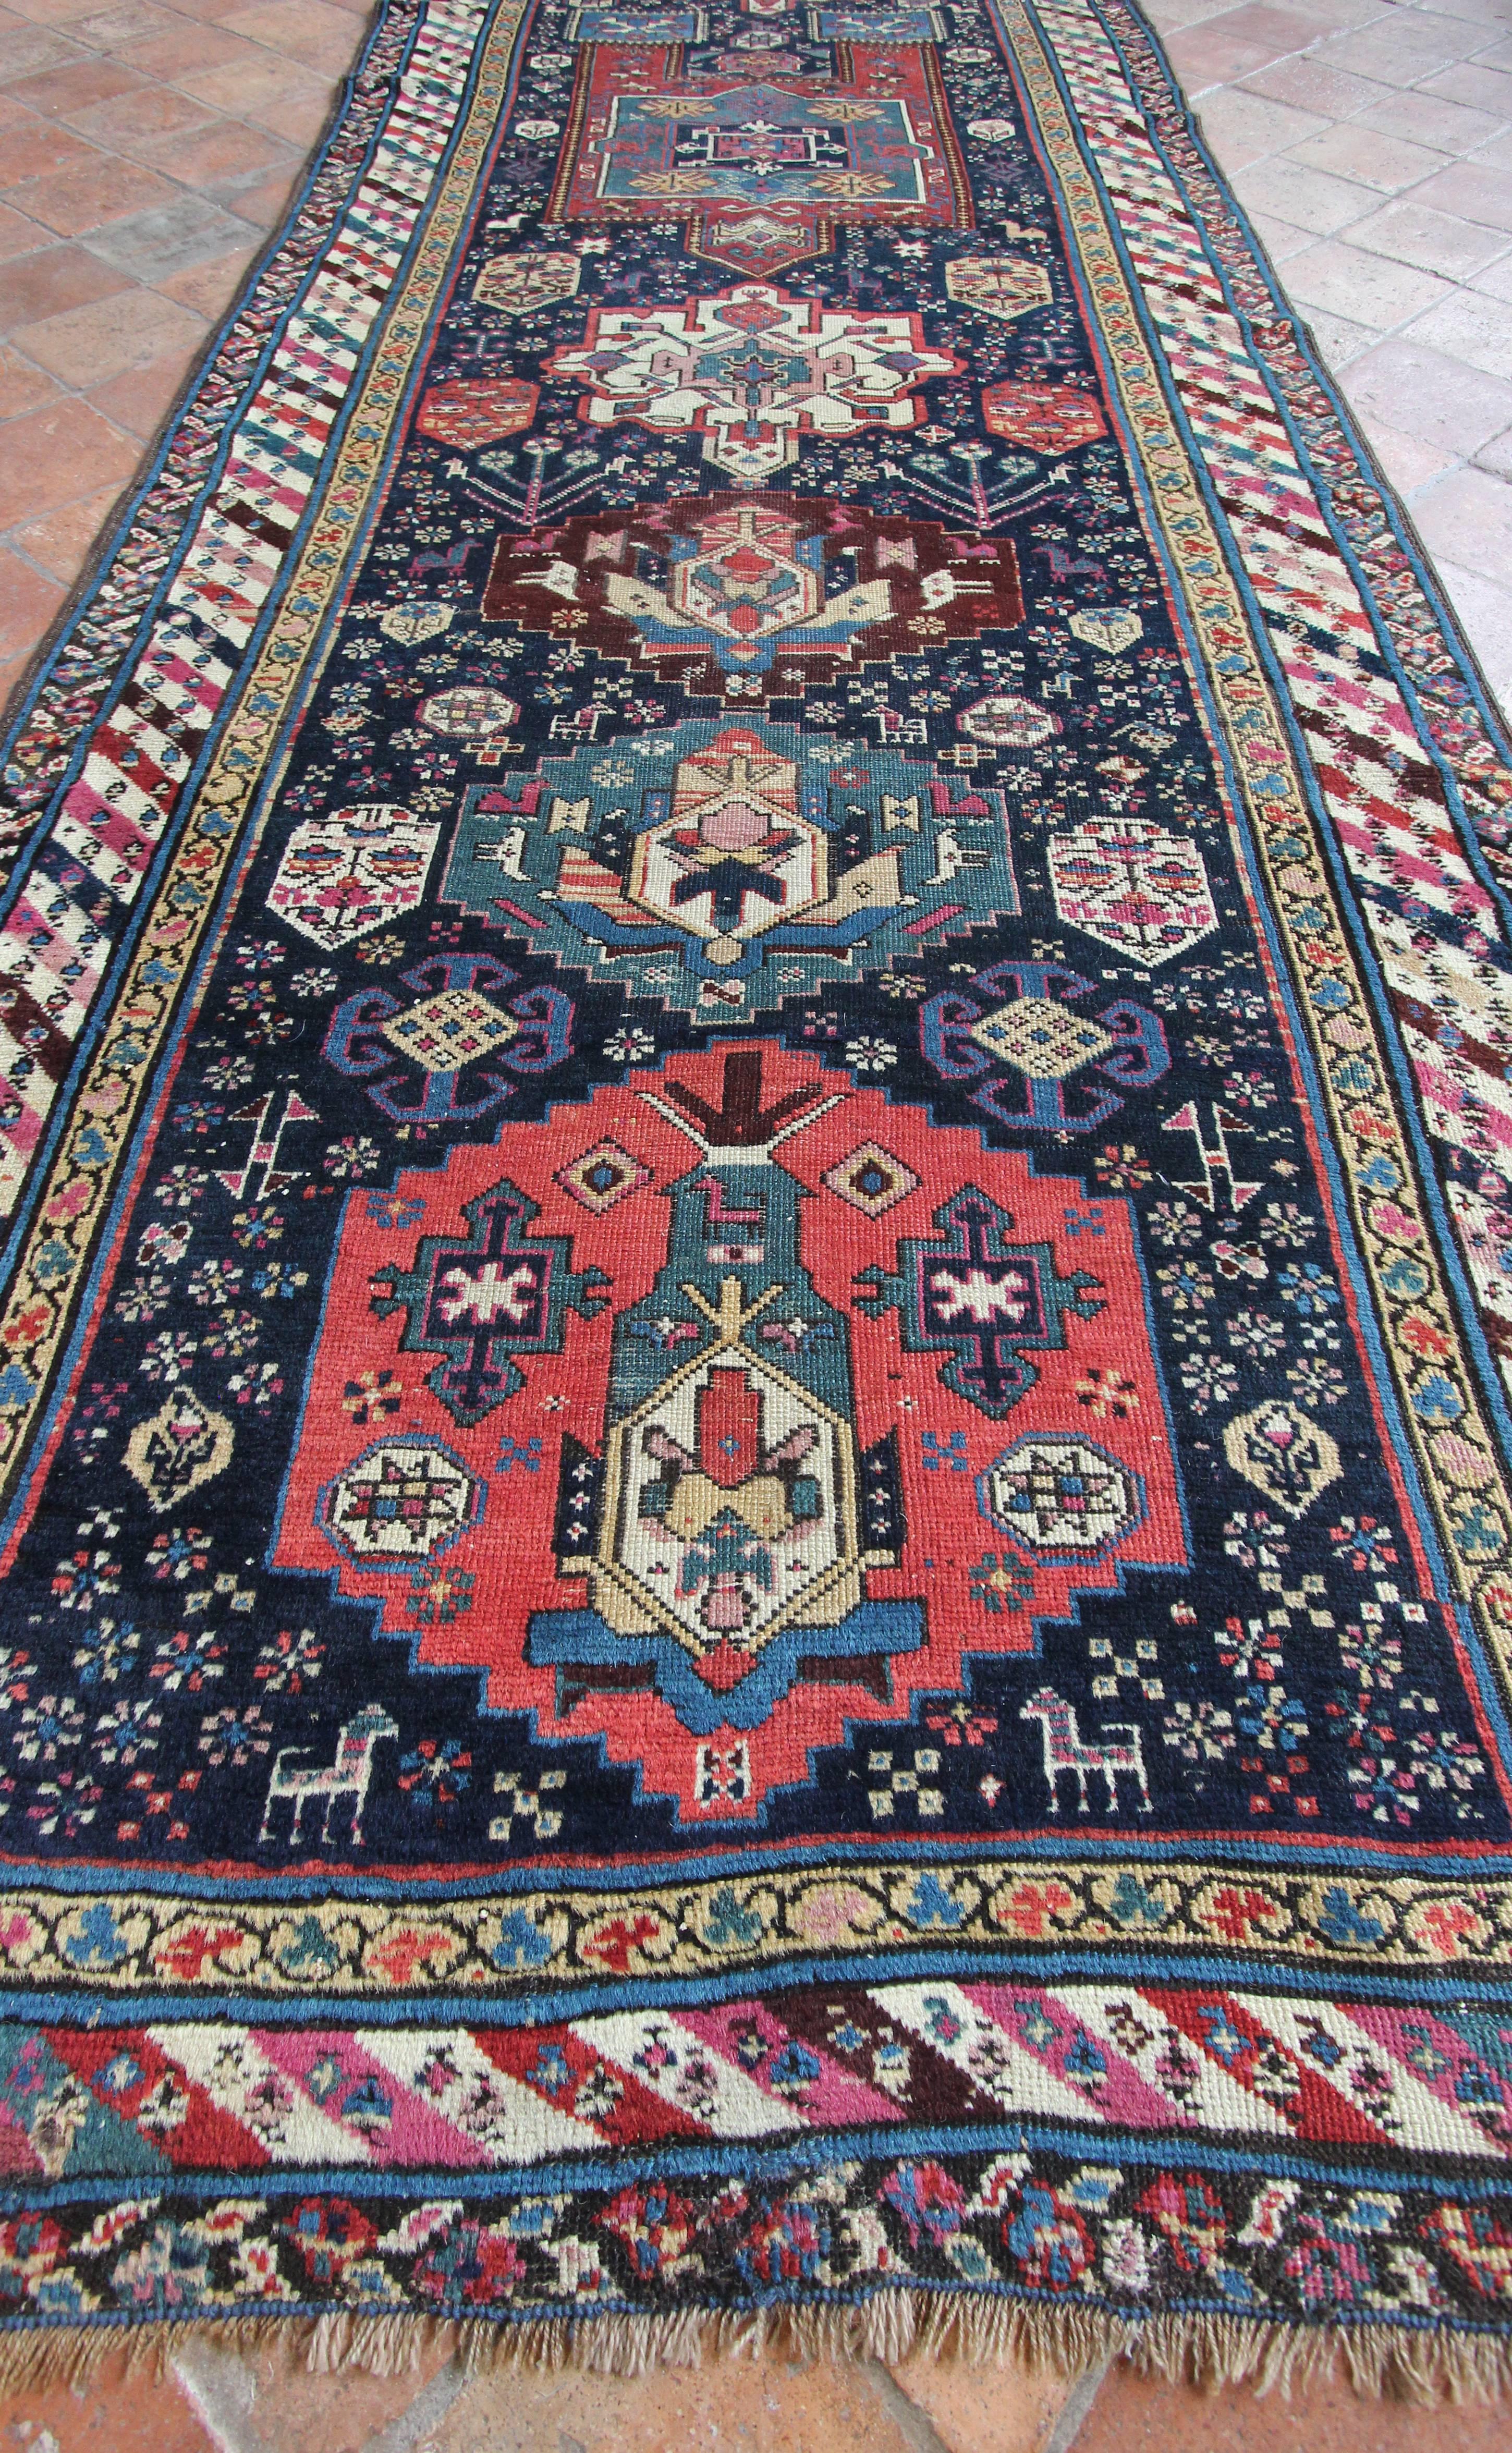 A rare early antique Karabagh runner with outstanding colours and a very interesting design. Woven with bold geometric motifs and an interesting Fachralo style one way design.  The colours are vibrant and saturated with the early dyes we can see